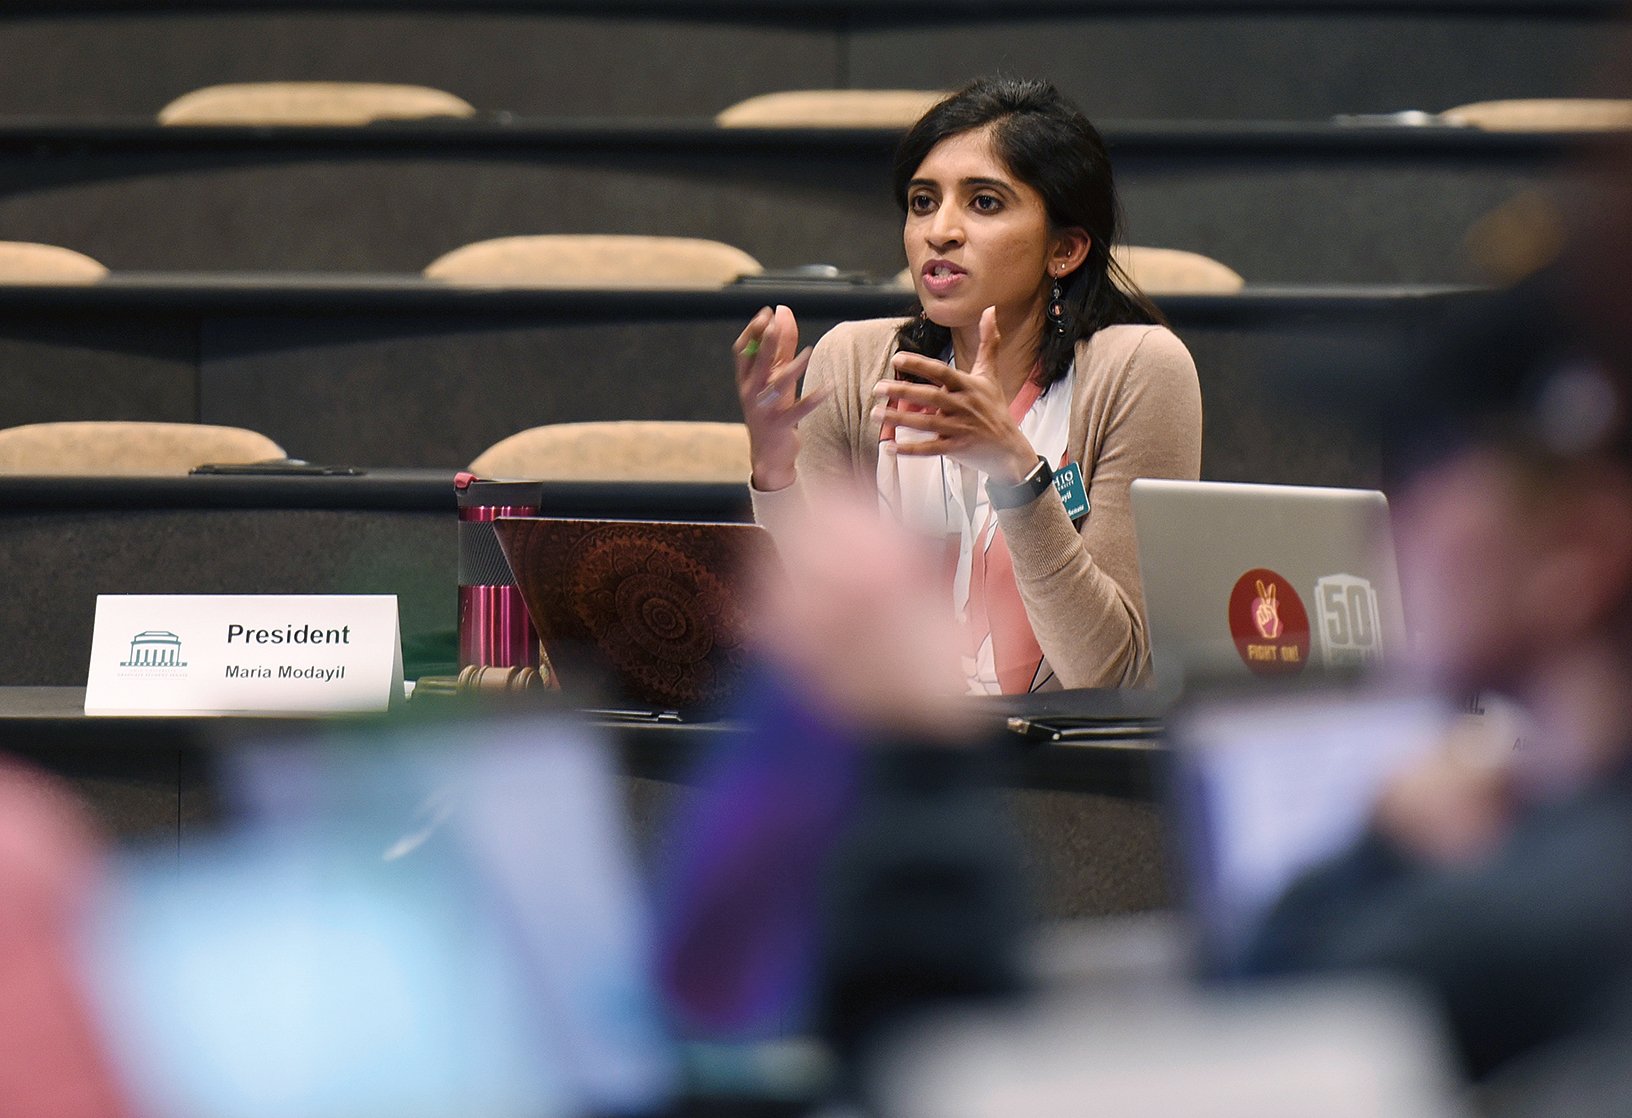 Maria Modayil’s role as Graduate Student Senate president brings with it opportunities to grow as a leader. Photo by McKinley Law, BSVC ’20